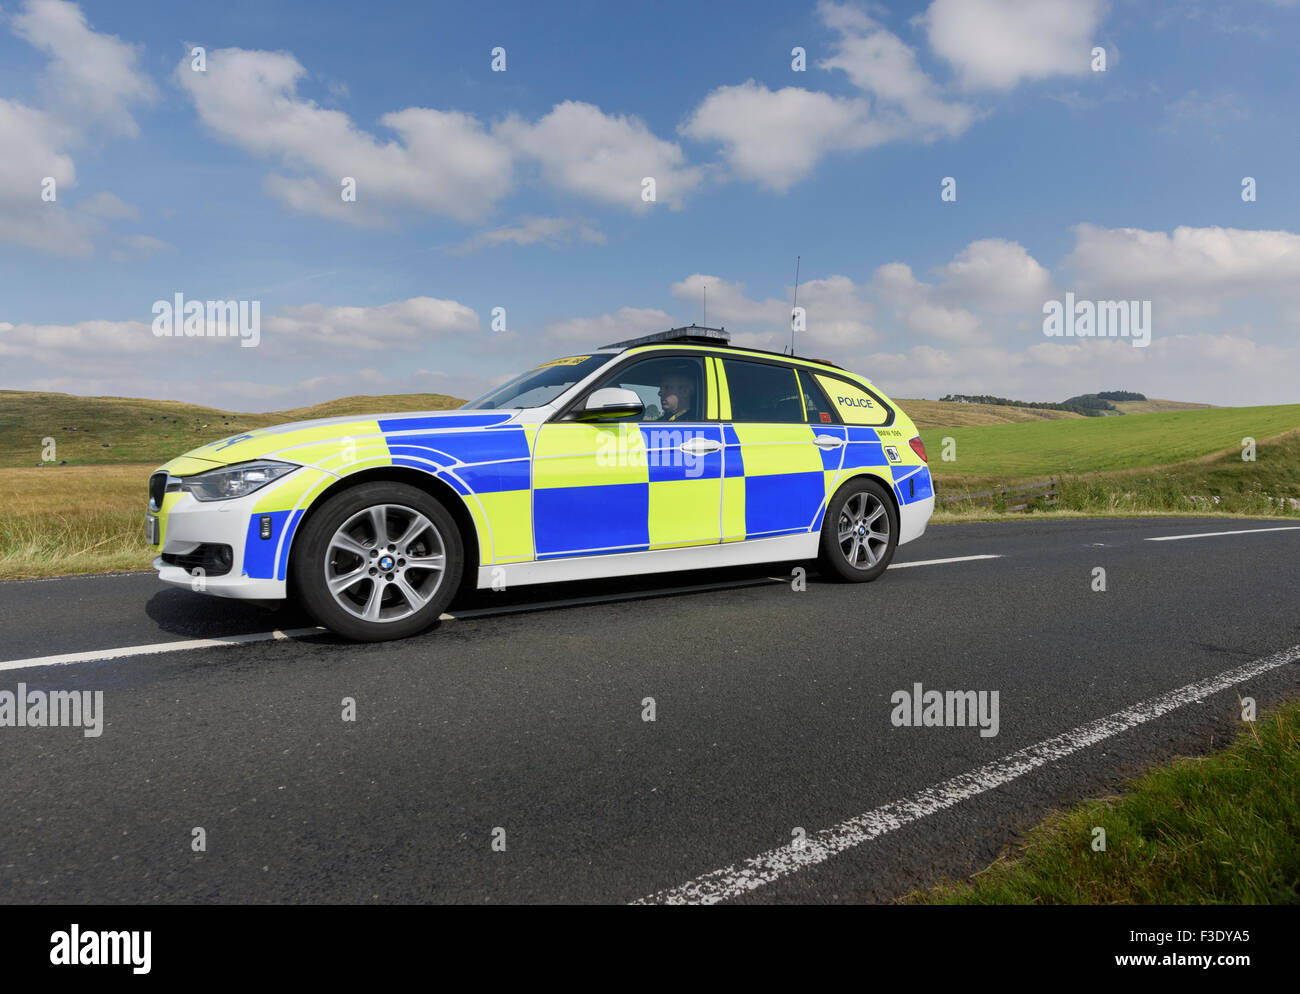 Police Patrol Car in action - police car speeding on a country road Stock  Photo - Alamy